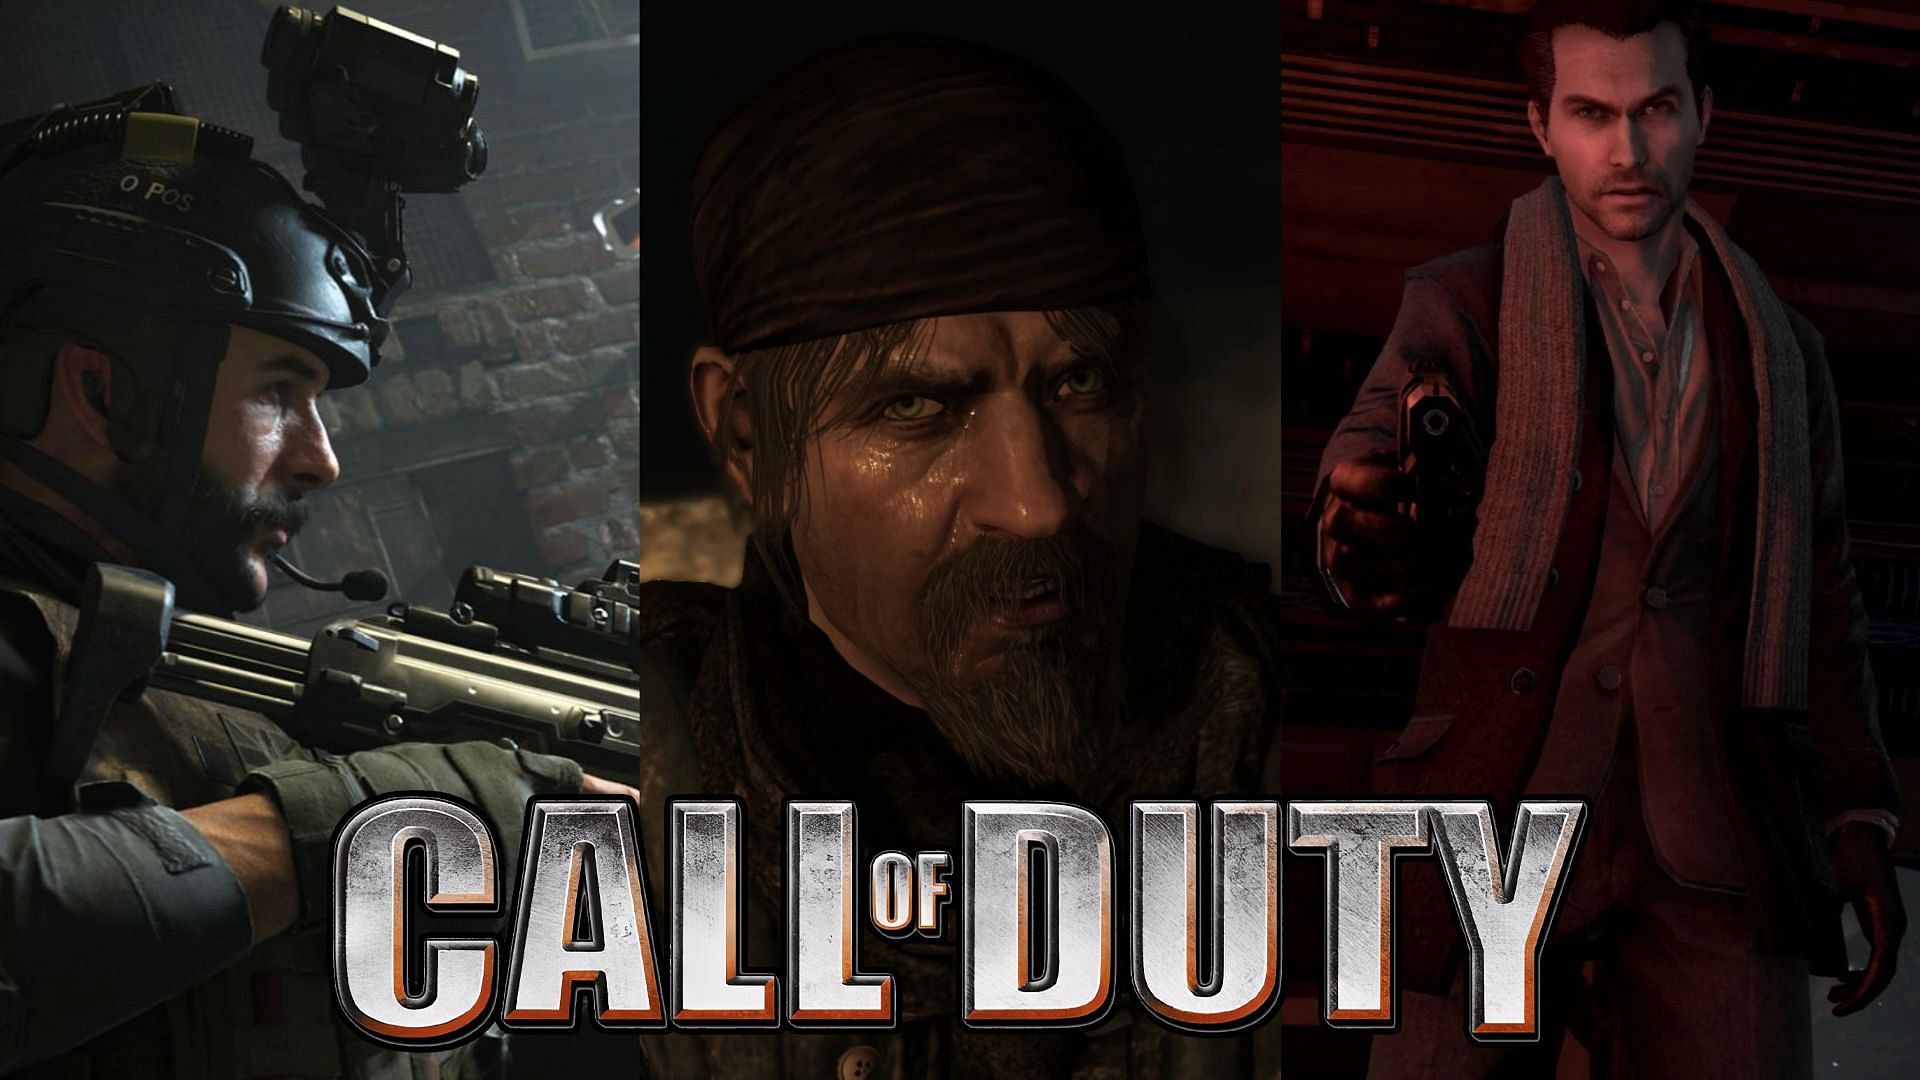 Shock and Awe, Call of Duty Wiki